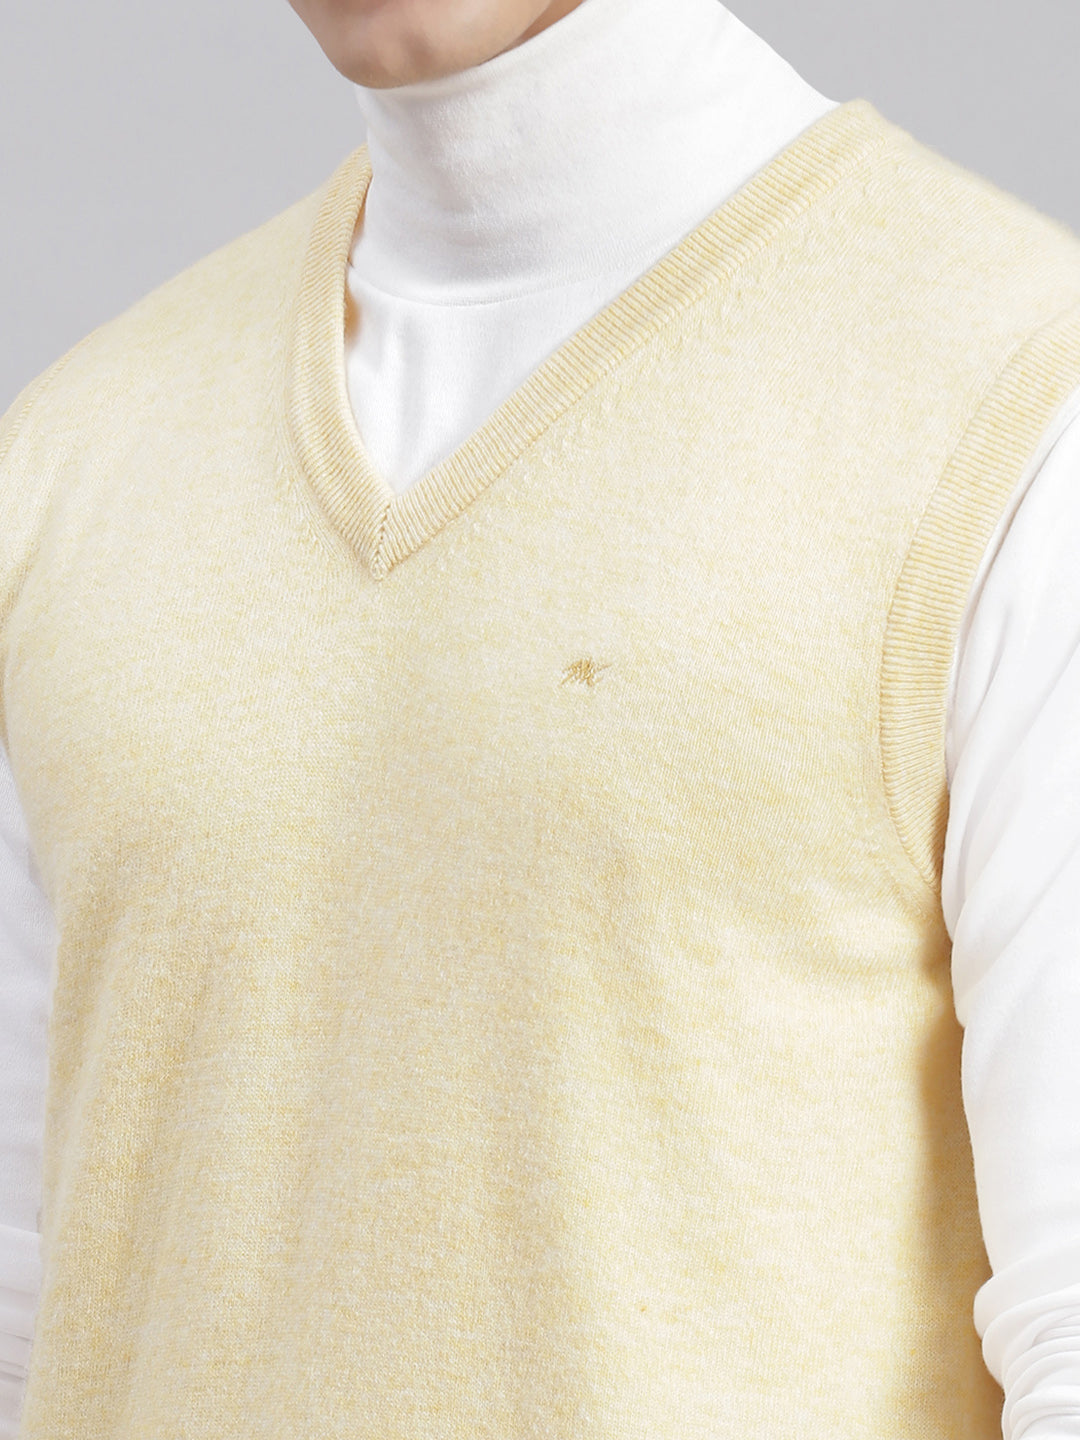 Men Beige Solid V Neck Sleeveless Sweaters/Pullovers